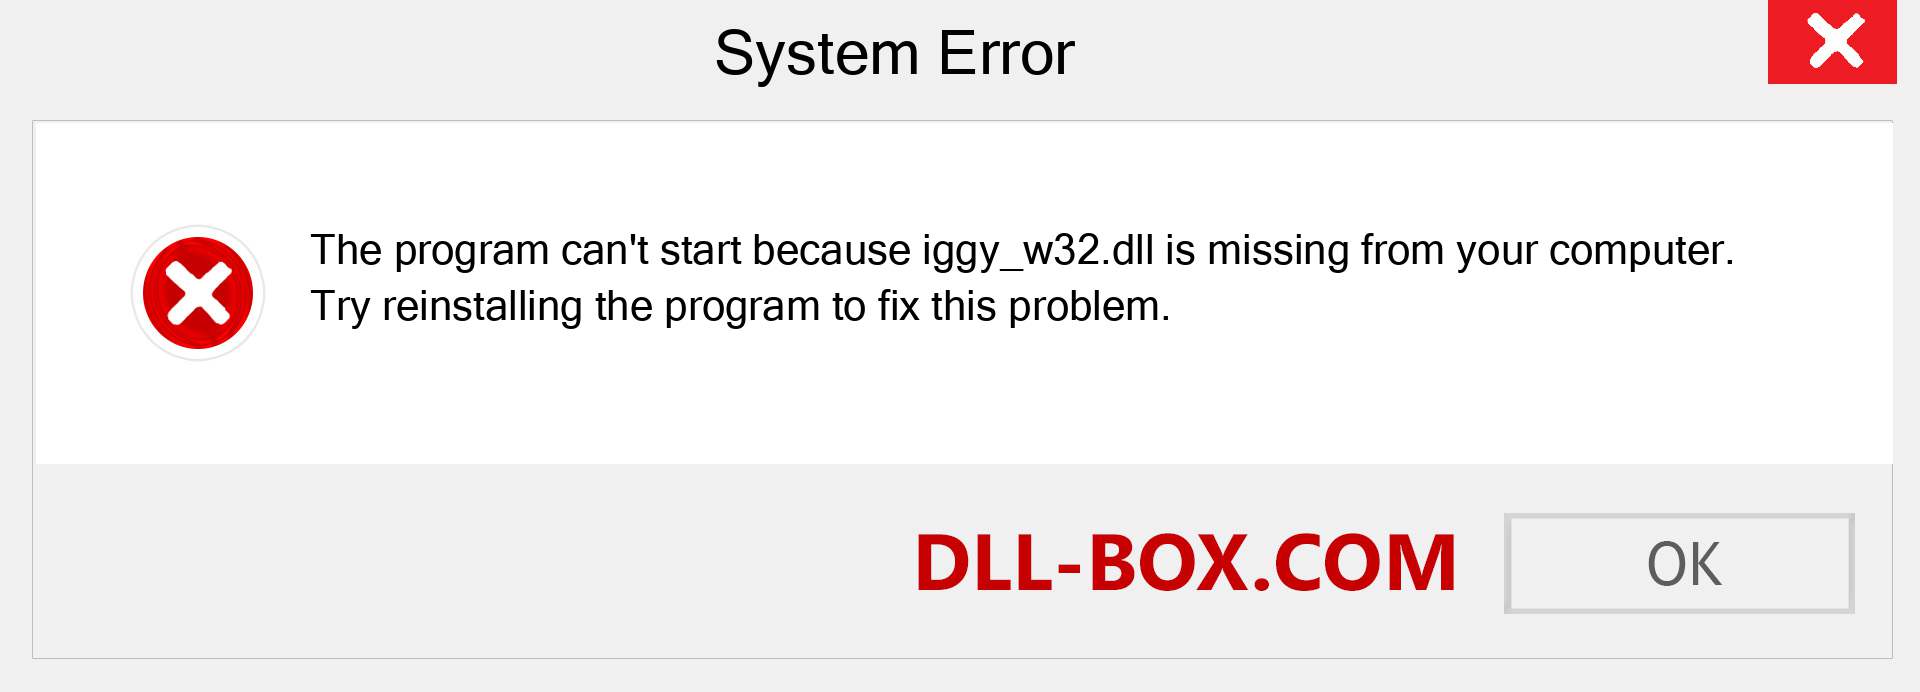  iggy_w32.dll file is missing?. Download for Windows 7, 8, 10 - Fix  iggy_w32 dll Missing Error on Windows, photos, images